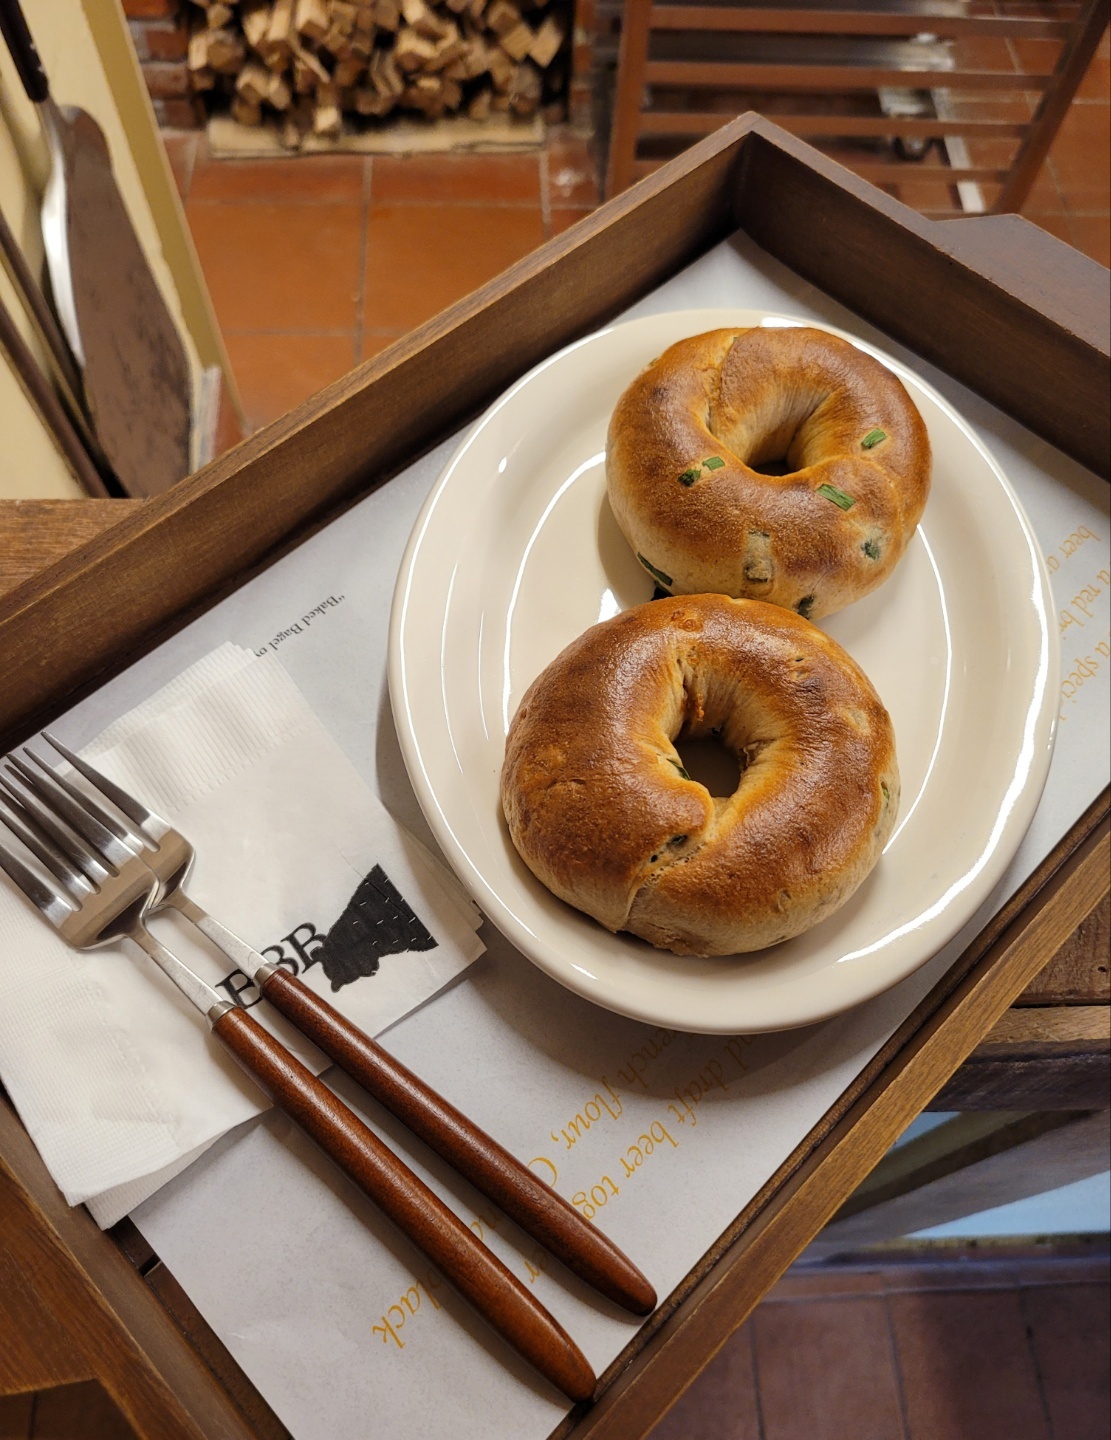 The onion chives bagel is among the eight different bagel varieties at BBB. (Park Yuna/The Korea Herald)